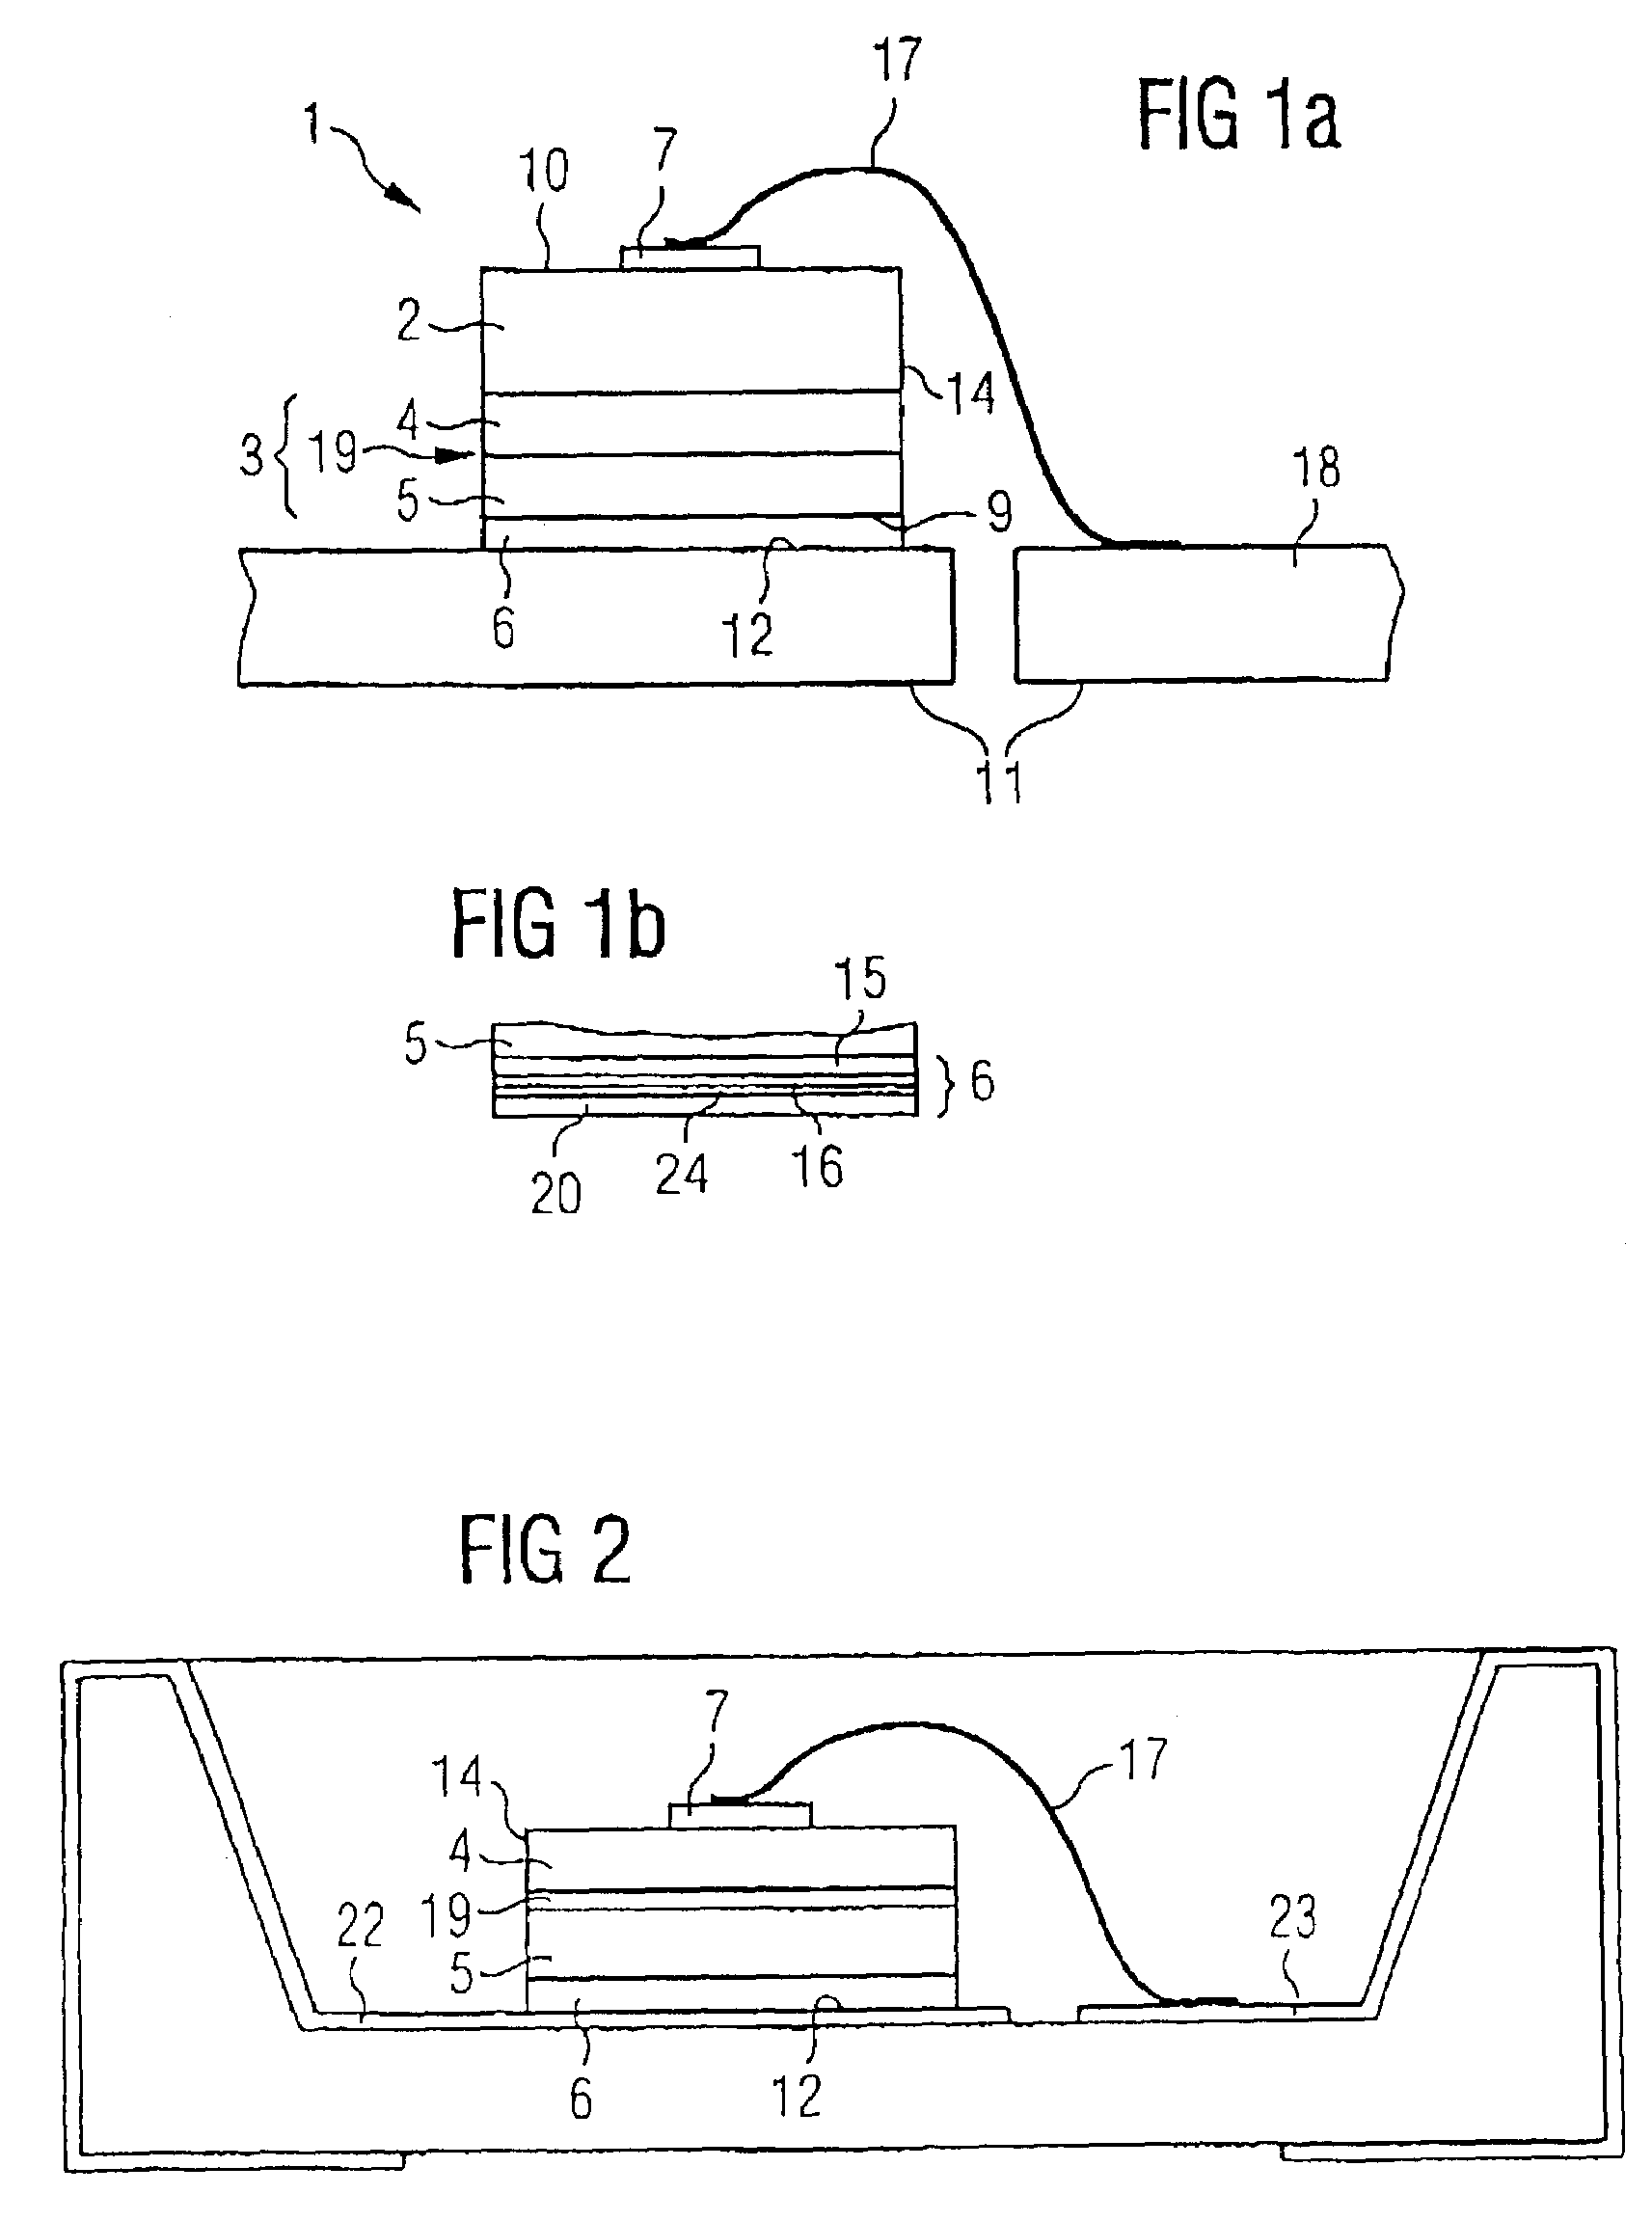 Light-emitting-diode chip comprising a sequence of GaN-based epitaxial layers which emit radiation and a method for producing the same